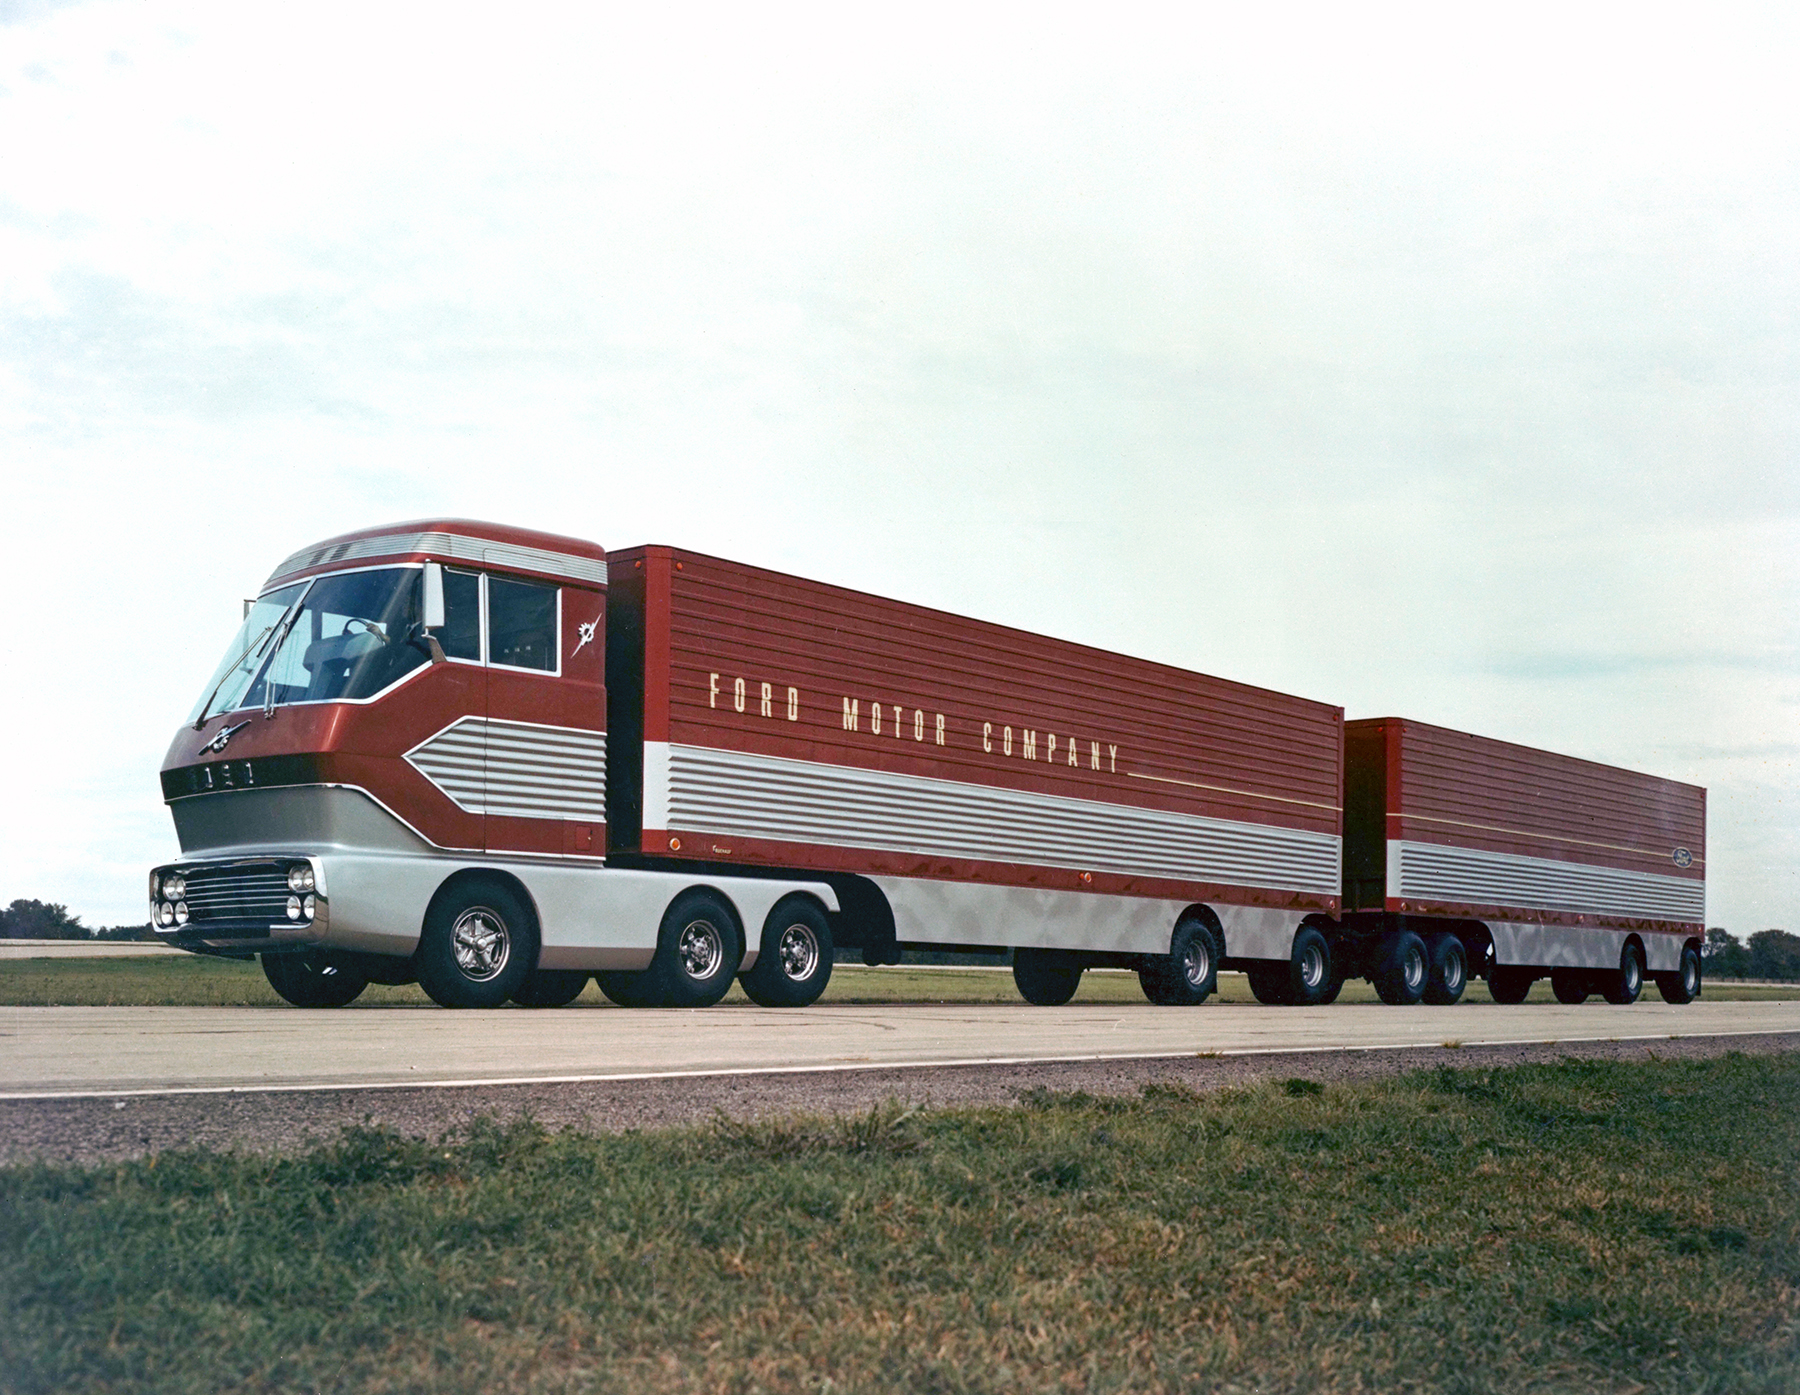 The red-and-silver 1964 Ford 'Big Red' gas turbine truck driving down a highway